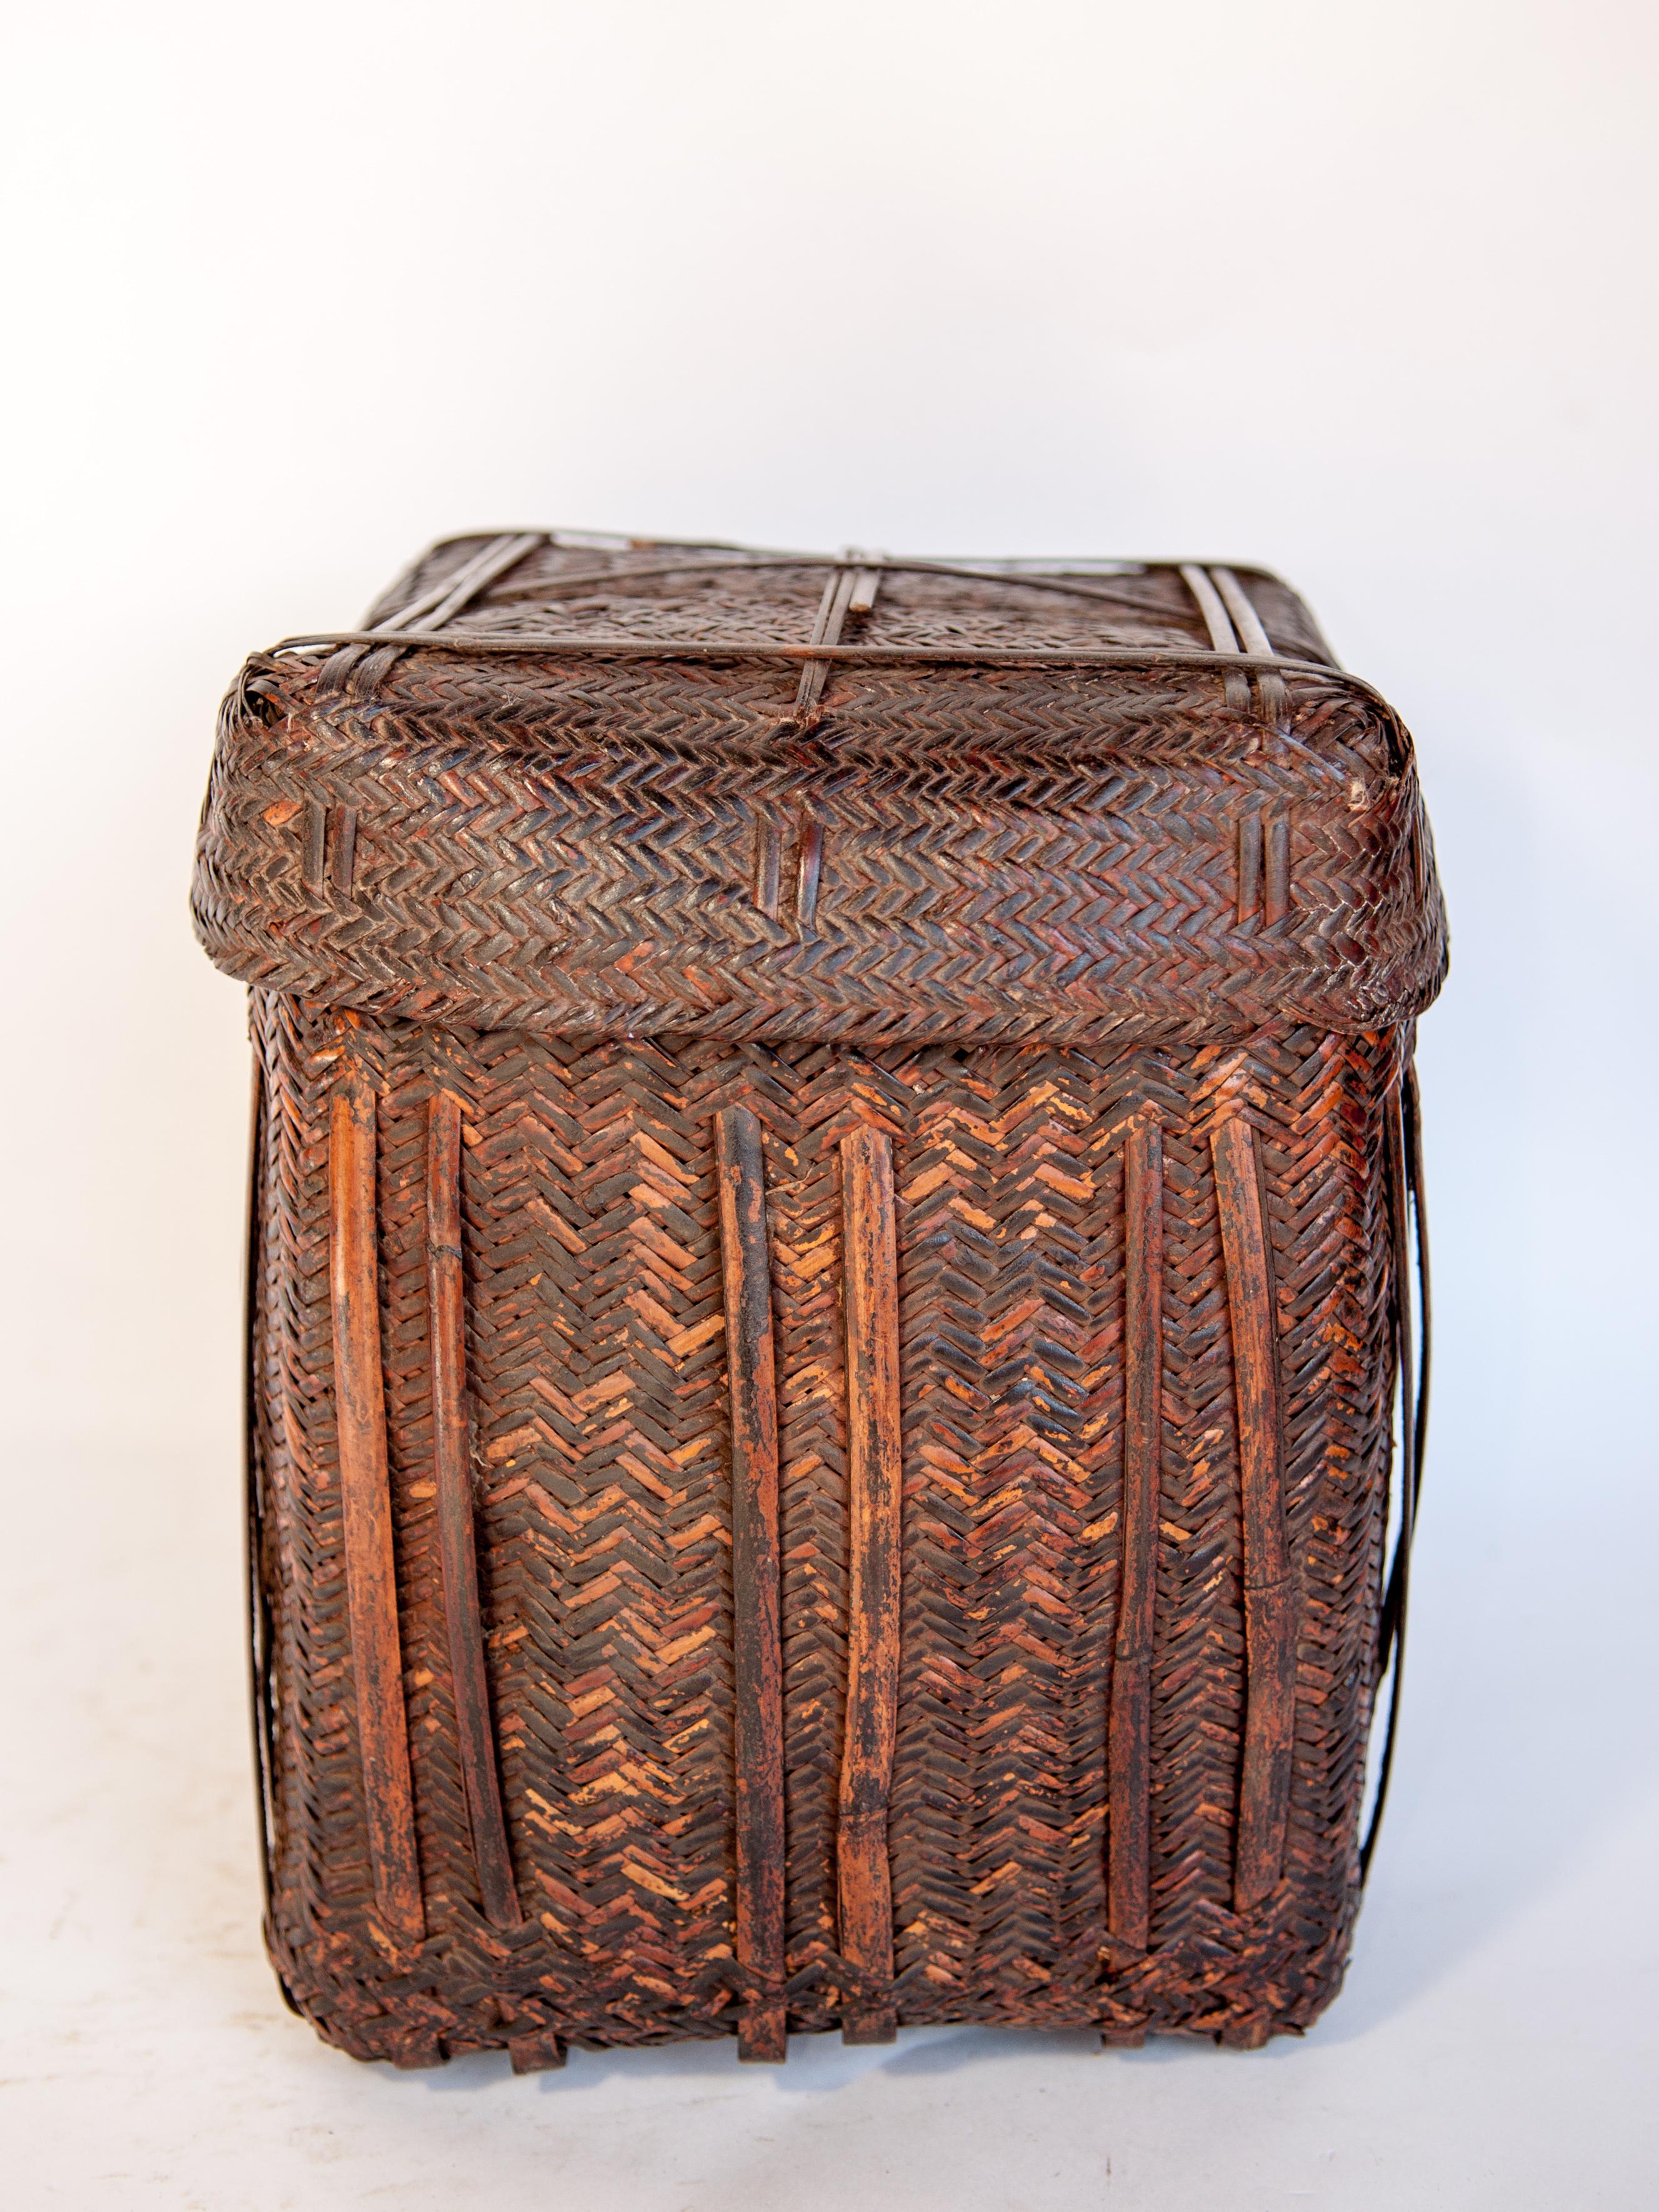 Hand-Crafted Rustic Tribal Storage Basket with Lid from the Tamang of Nepal, Mid-20th Century